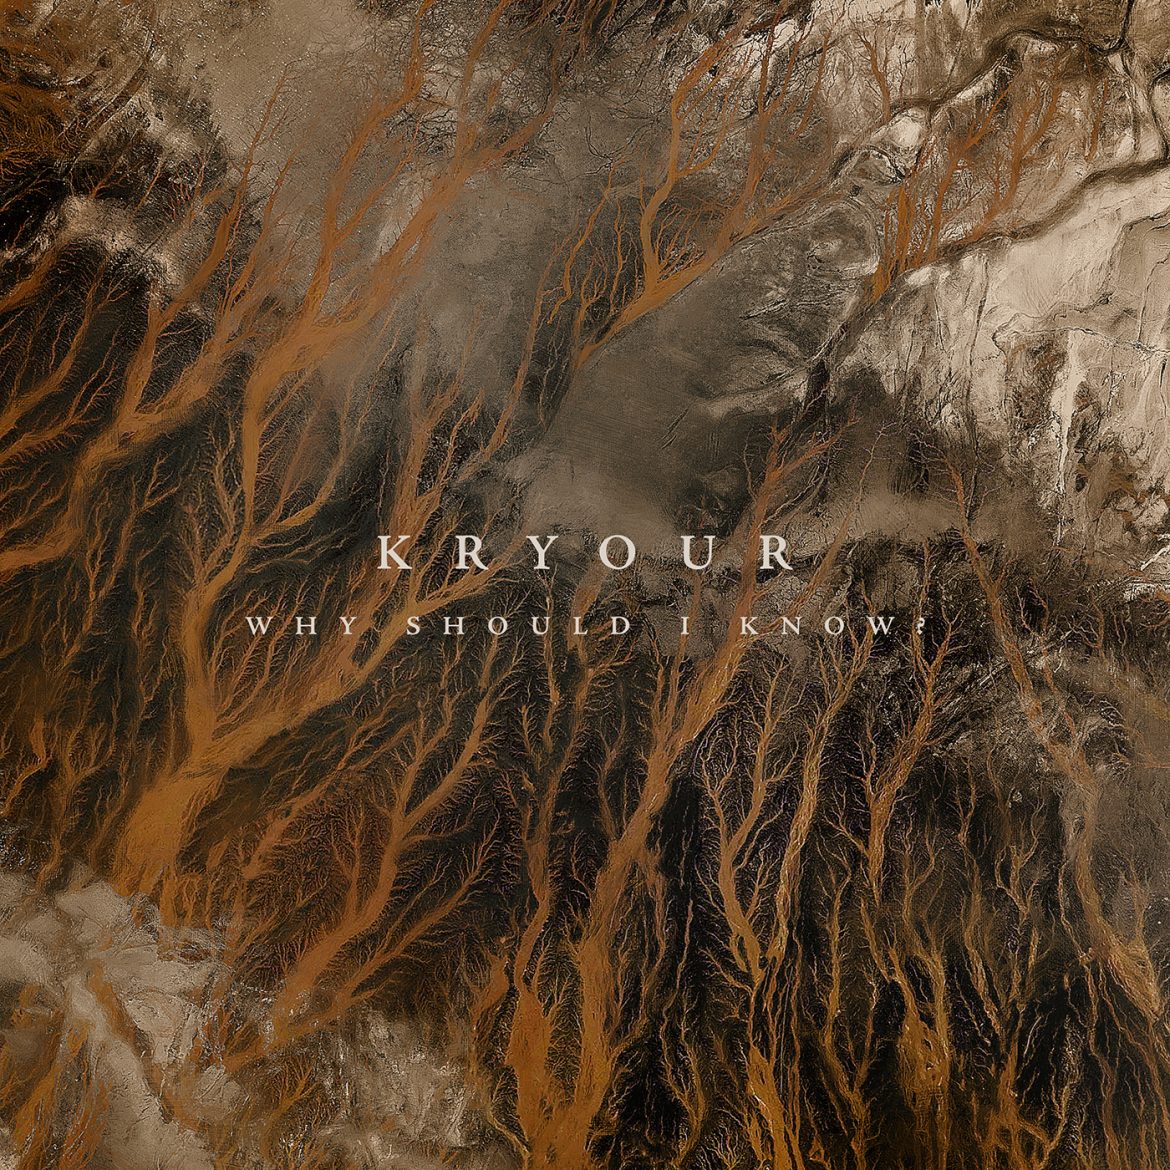 The new single ‘Why Should I Know?’ from ‘Kryour’ with its fast-paced metal power and marvelous progressive fusion is on the playlist now.